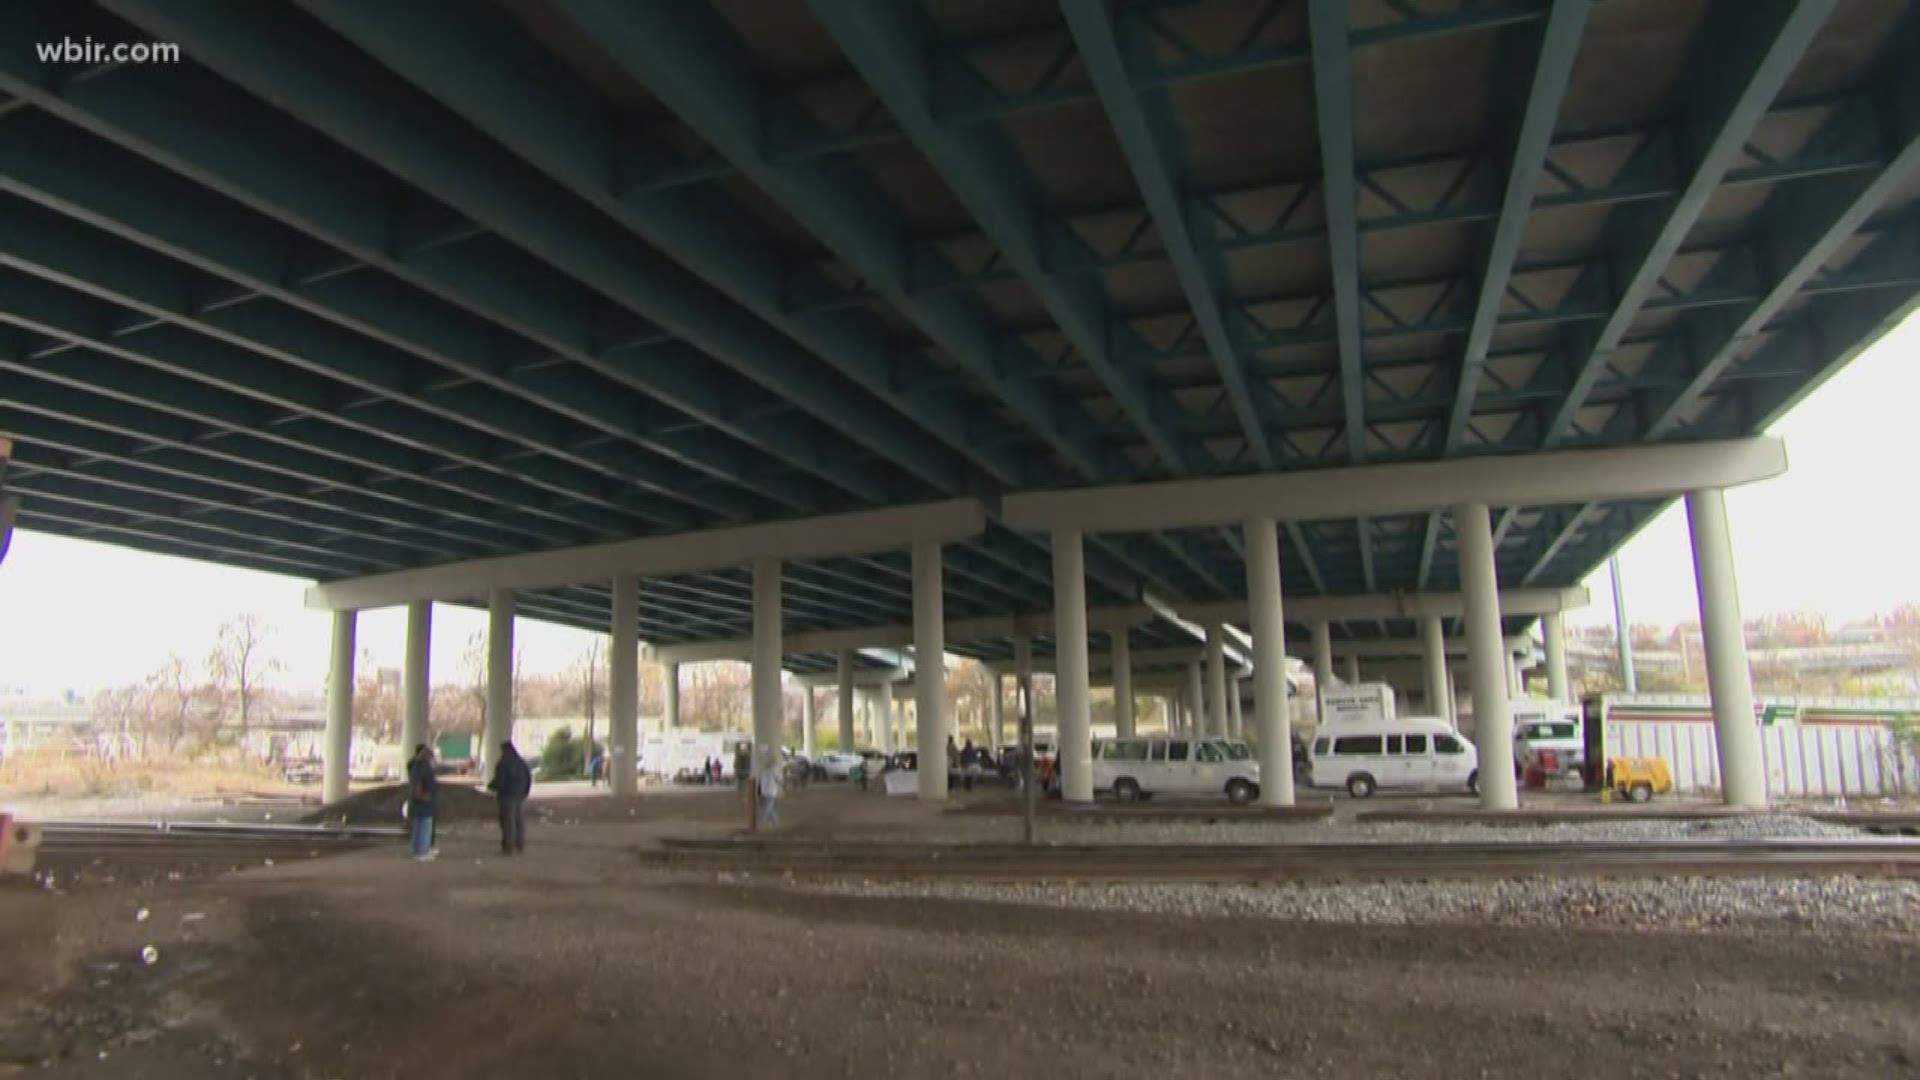 It's the area under the I-40 bridge on Broadway where homeless people often gather on the sidewalks. Leaders hopes to begin paving today.

The city also plans to install new fencing, benches, picnic tables and portable bathrooms.